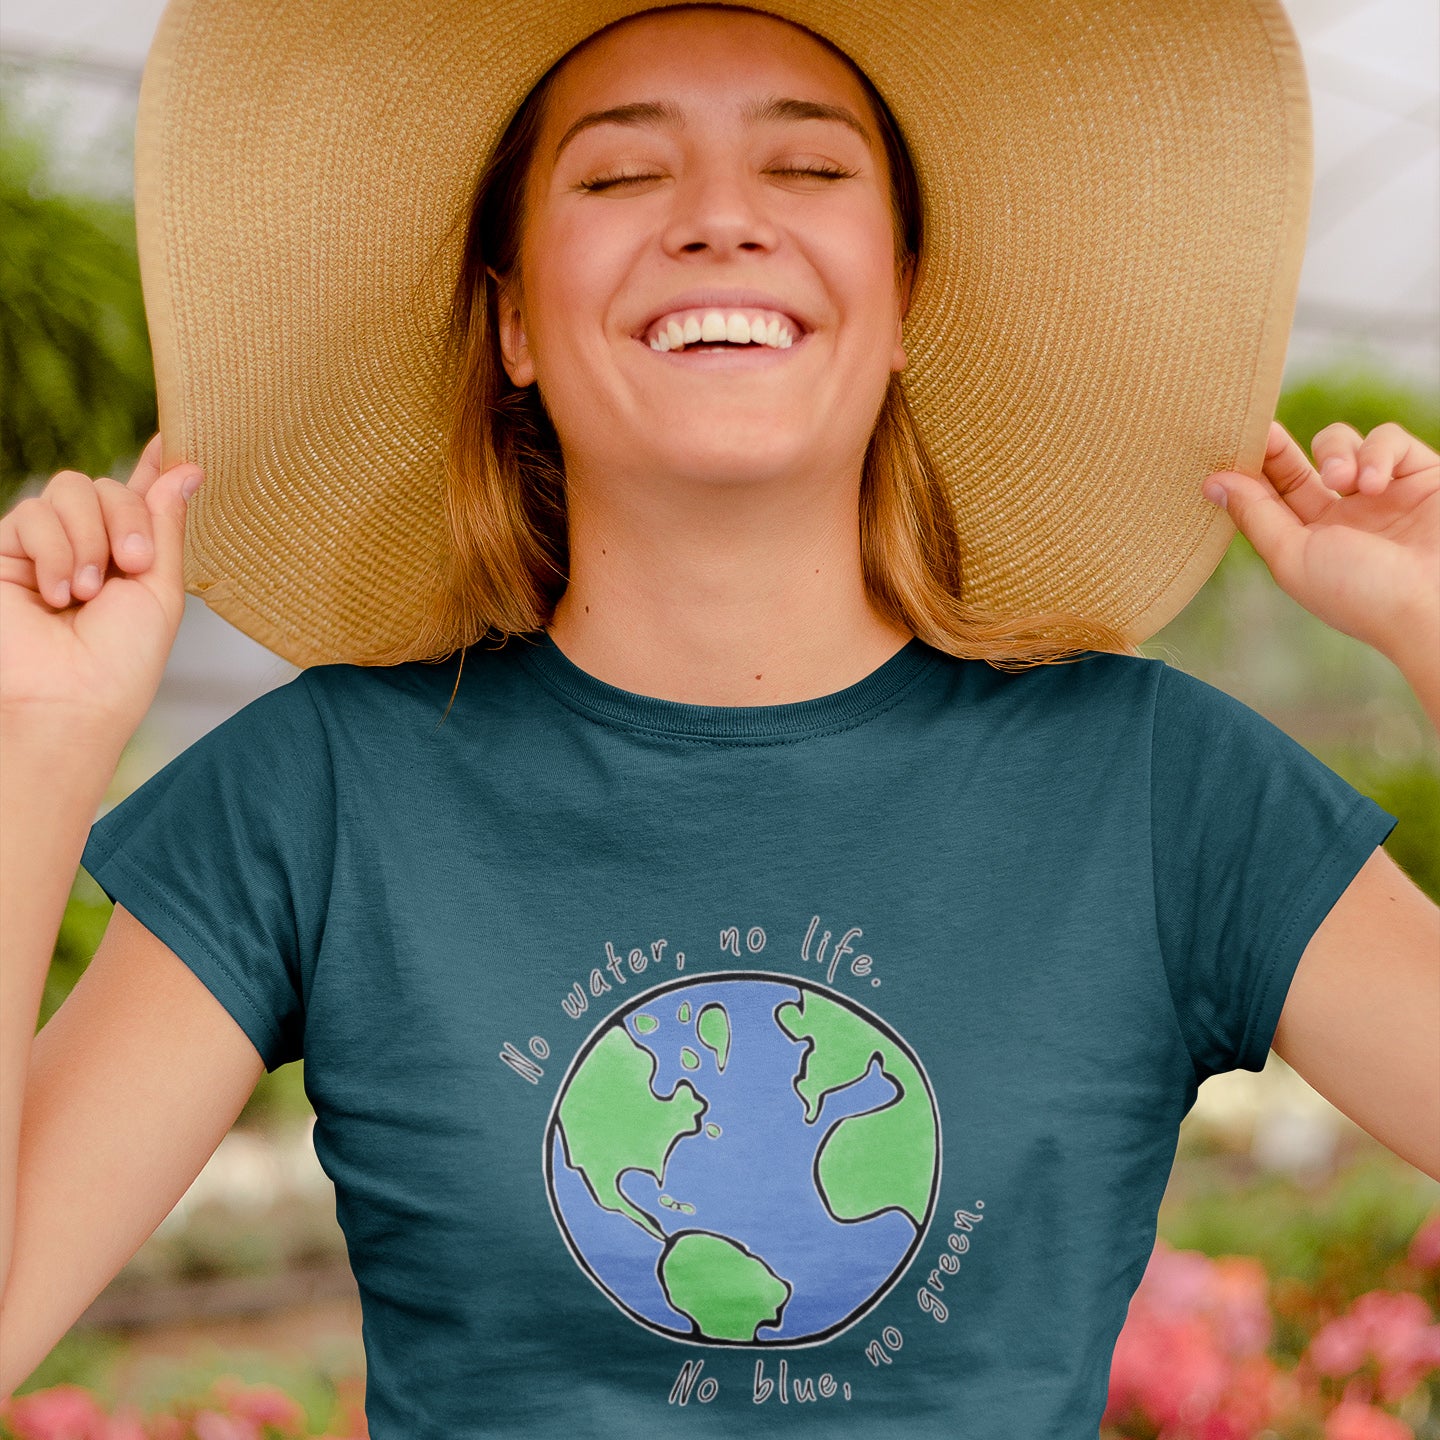 girl in greenhouse with flowers and sunhat wearing architectconstructor "No Blue No Green" tshirt - 10% of profits give back to non-profit organizations - ethically and sustainably made clothing